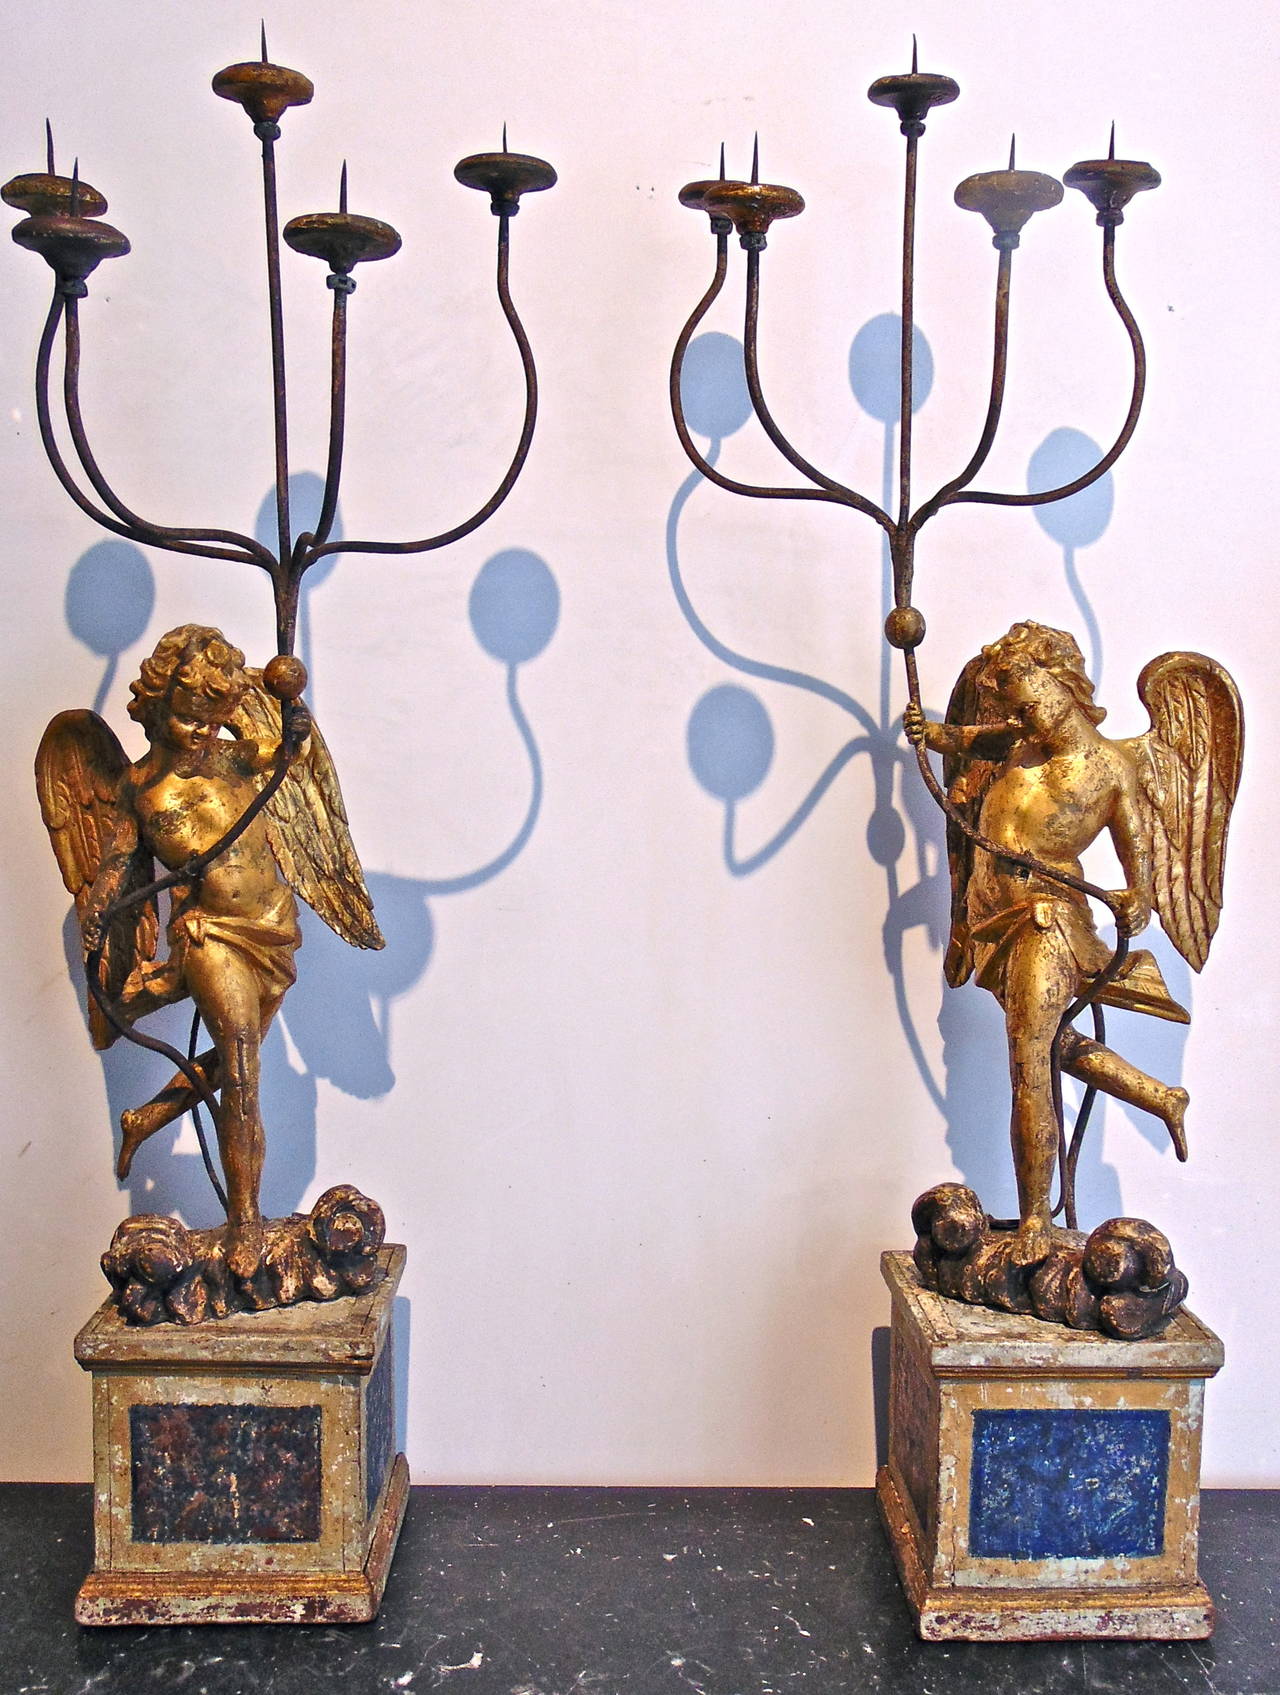 Carved Early 18th Century Italian Baroque Pricket Candelabra